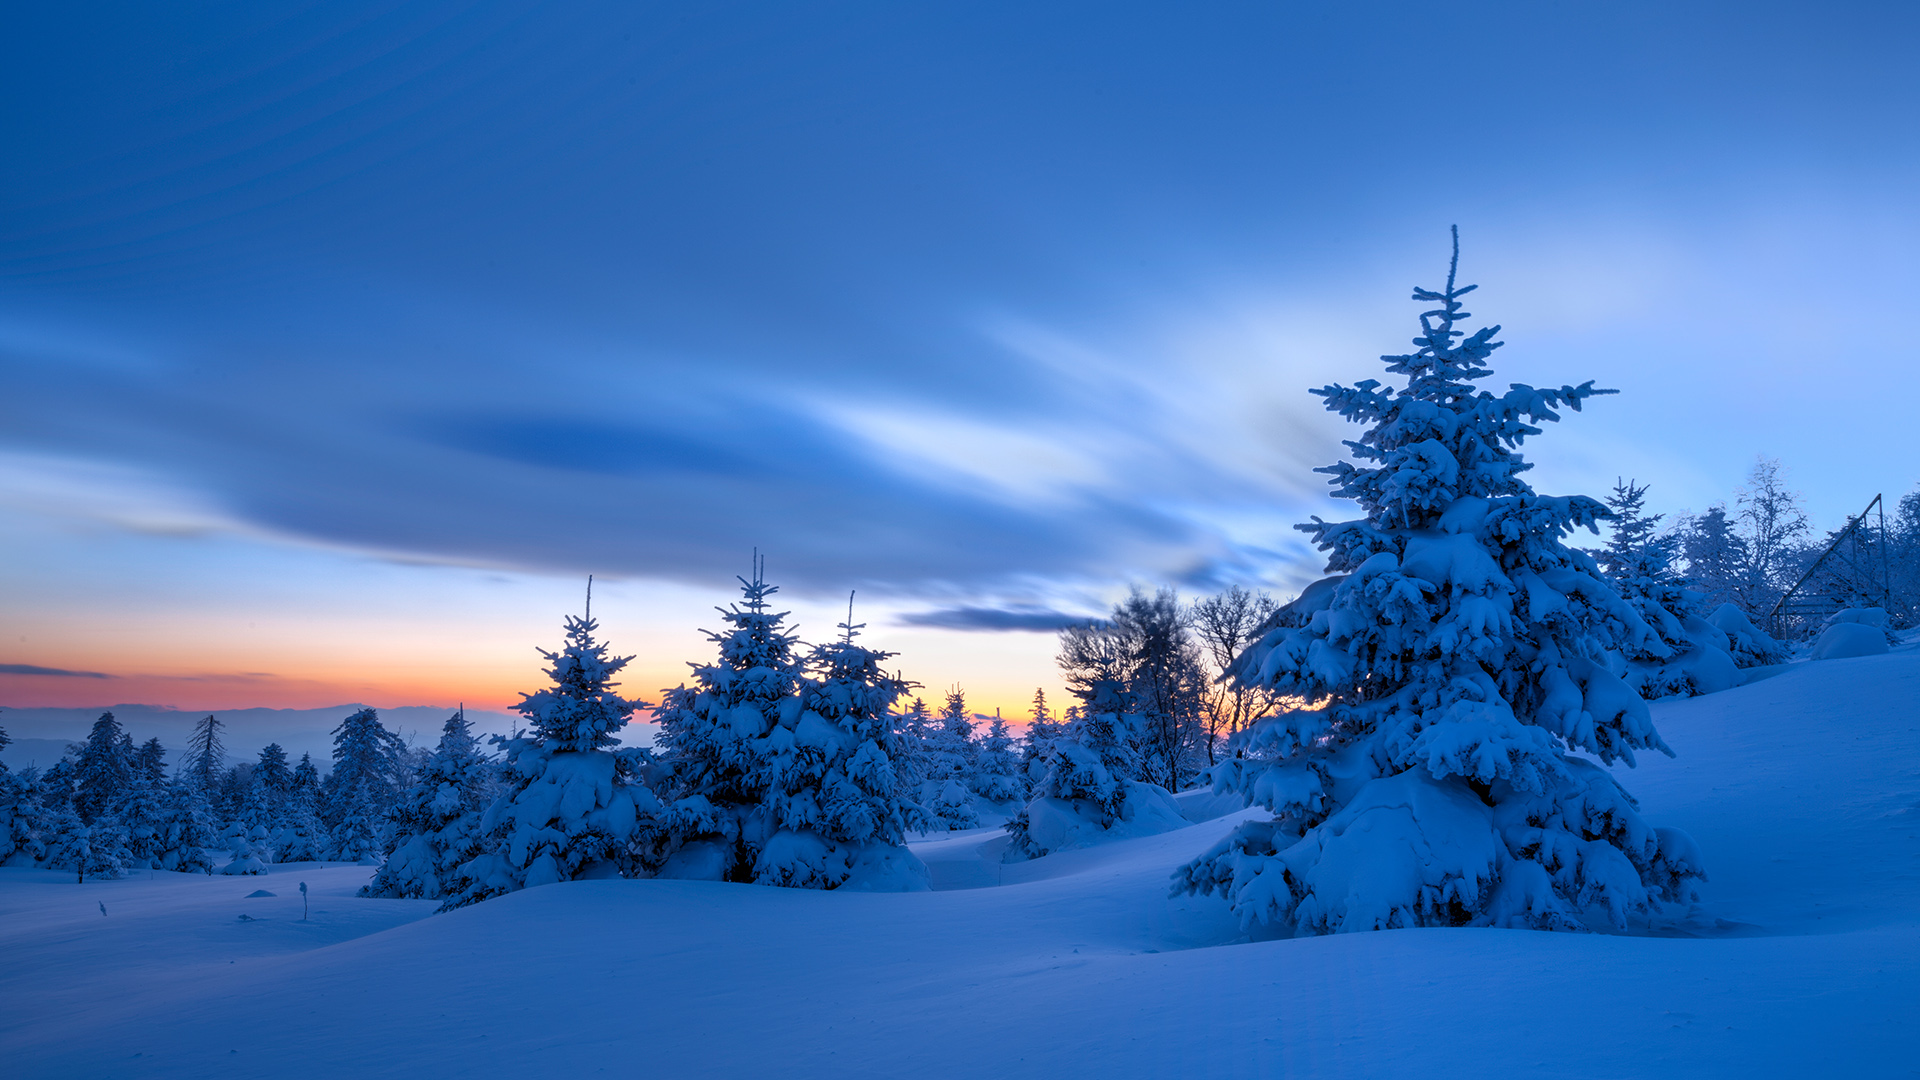 General 1920x1080 snow clouds sky sunset mountains trees spruce winter China nature landscape